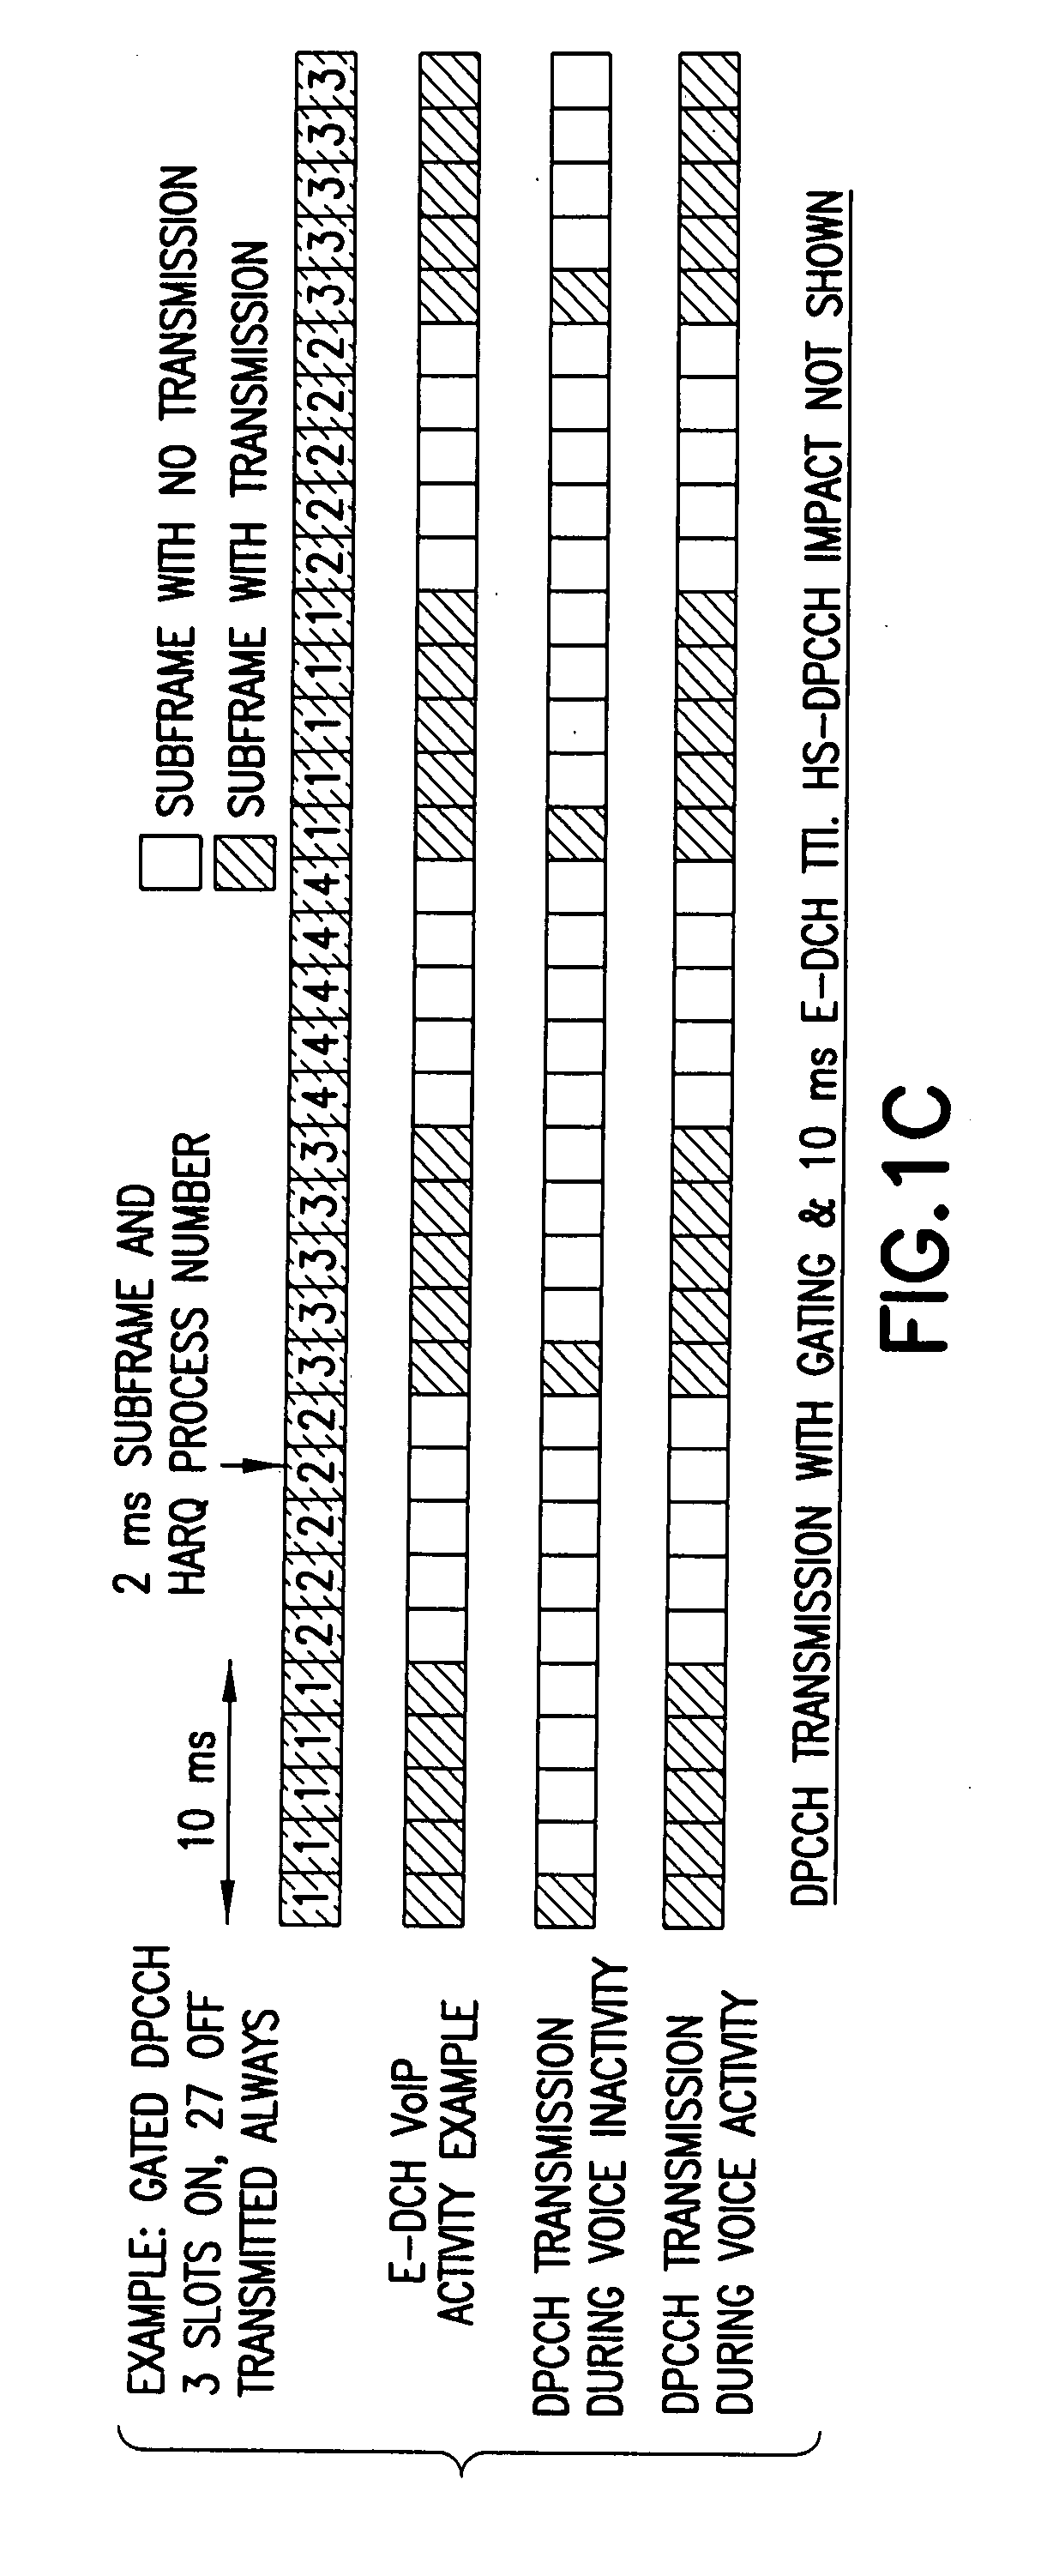 Apparatus, methods and computer program products providing support for packet data user continuous uplink connectivity